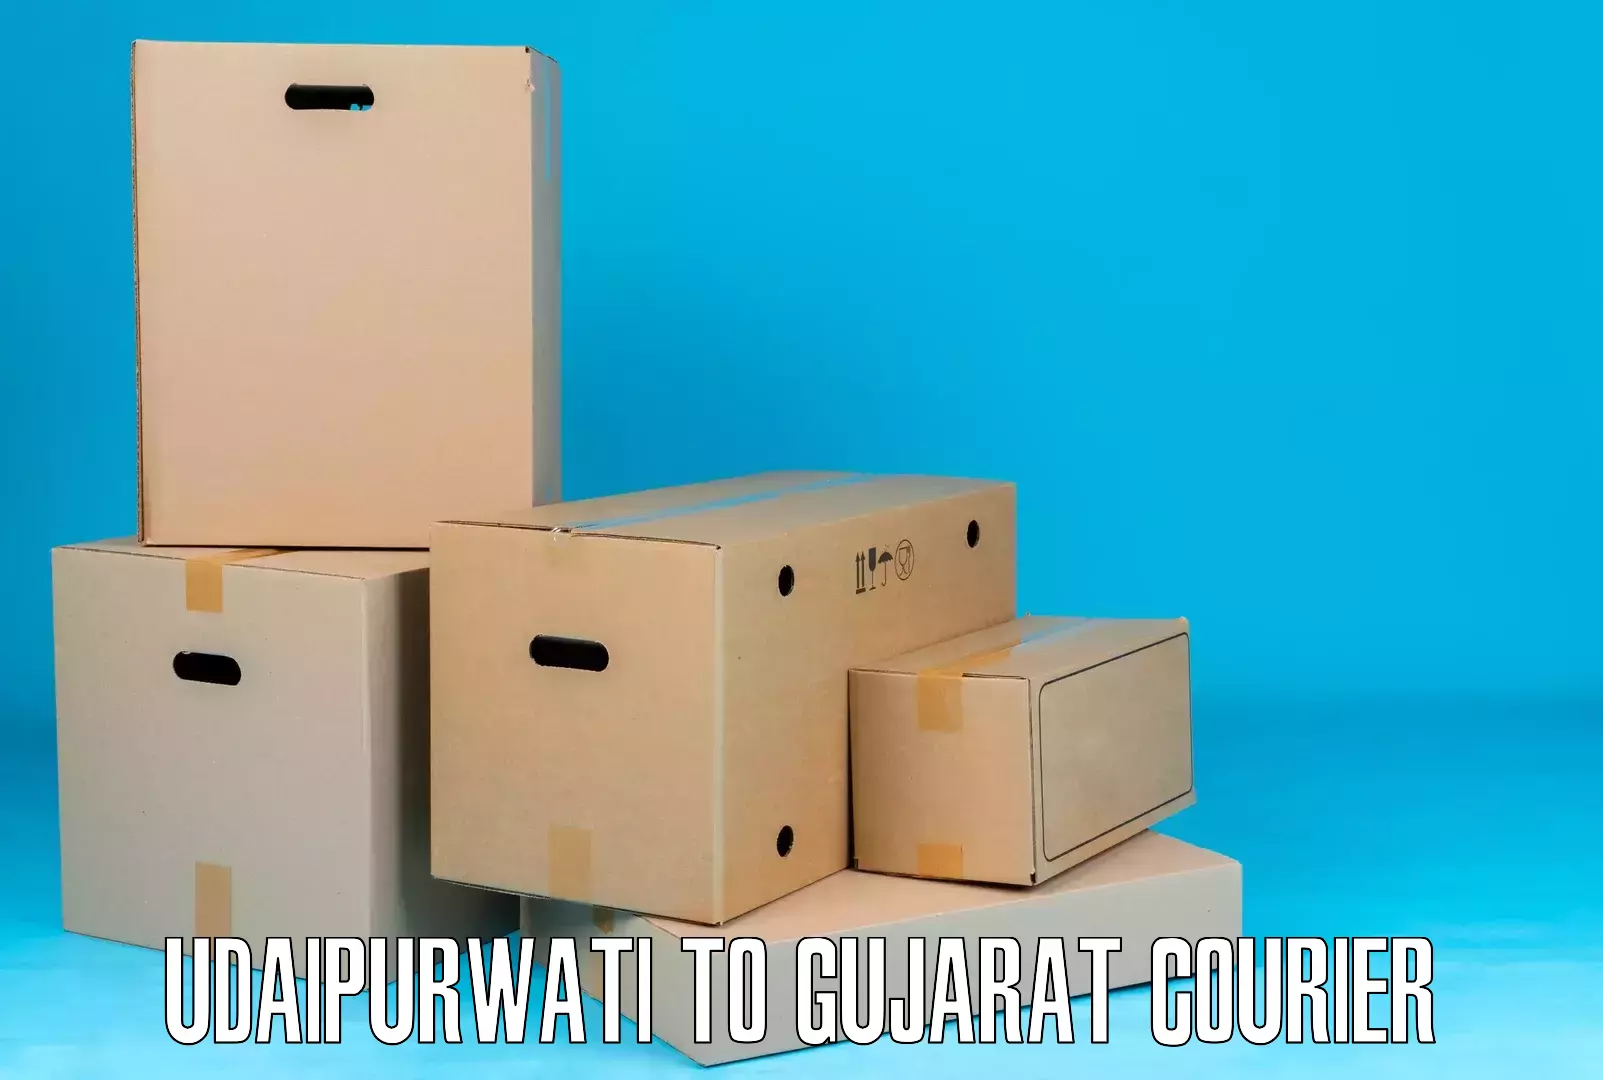 Next-day delivery options Udaipurwati to Morbi